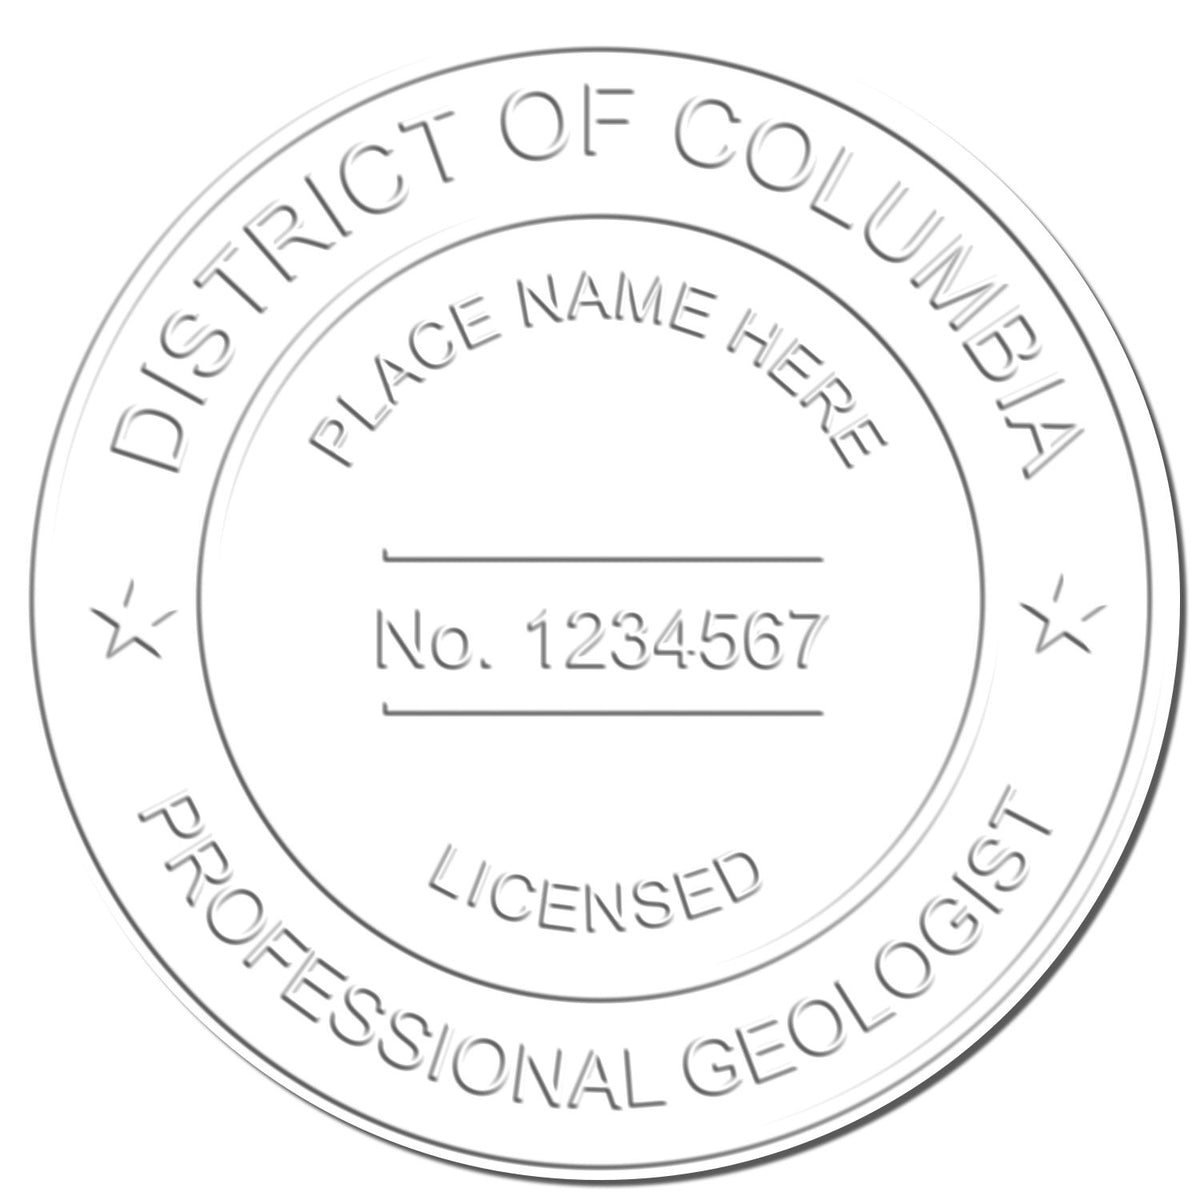 This paper is stamped with a sample imprint of the Handheld District of Columbia Professional Geologist Embosser, signifying its quality and reliability.